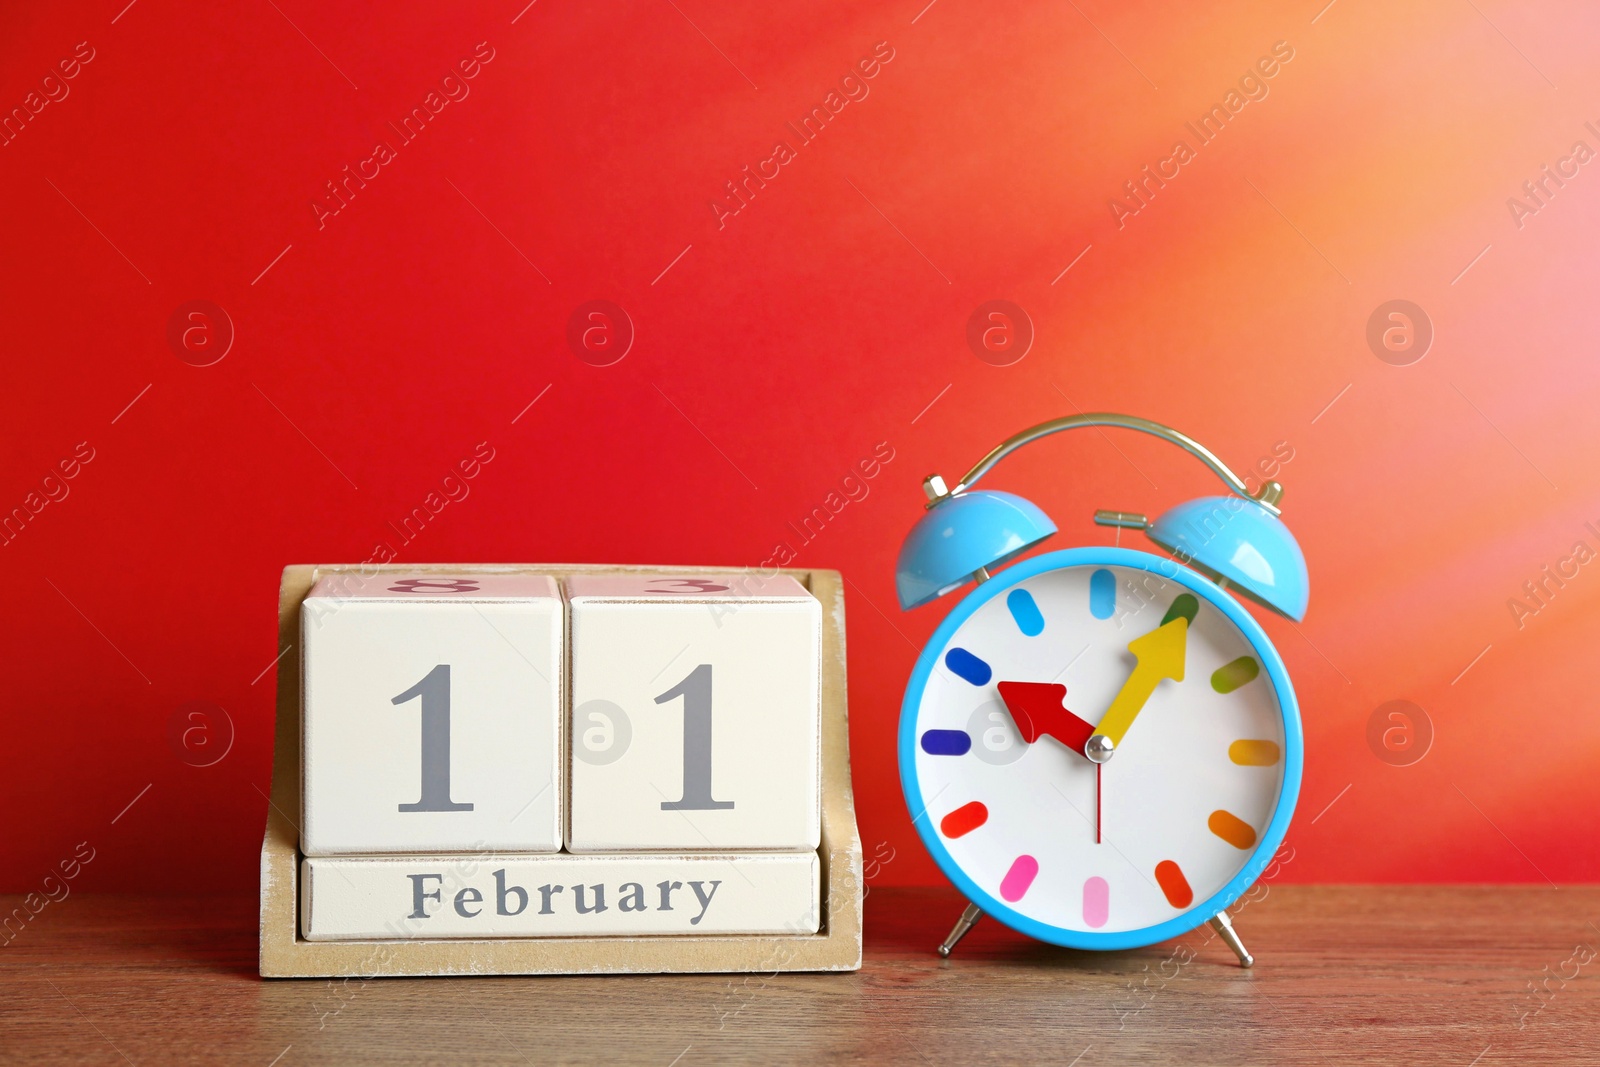 Image of Wooden block calendar and alarm clock on table against red background